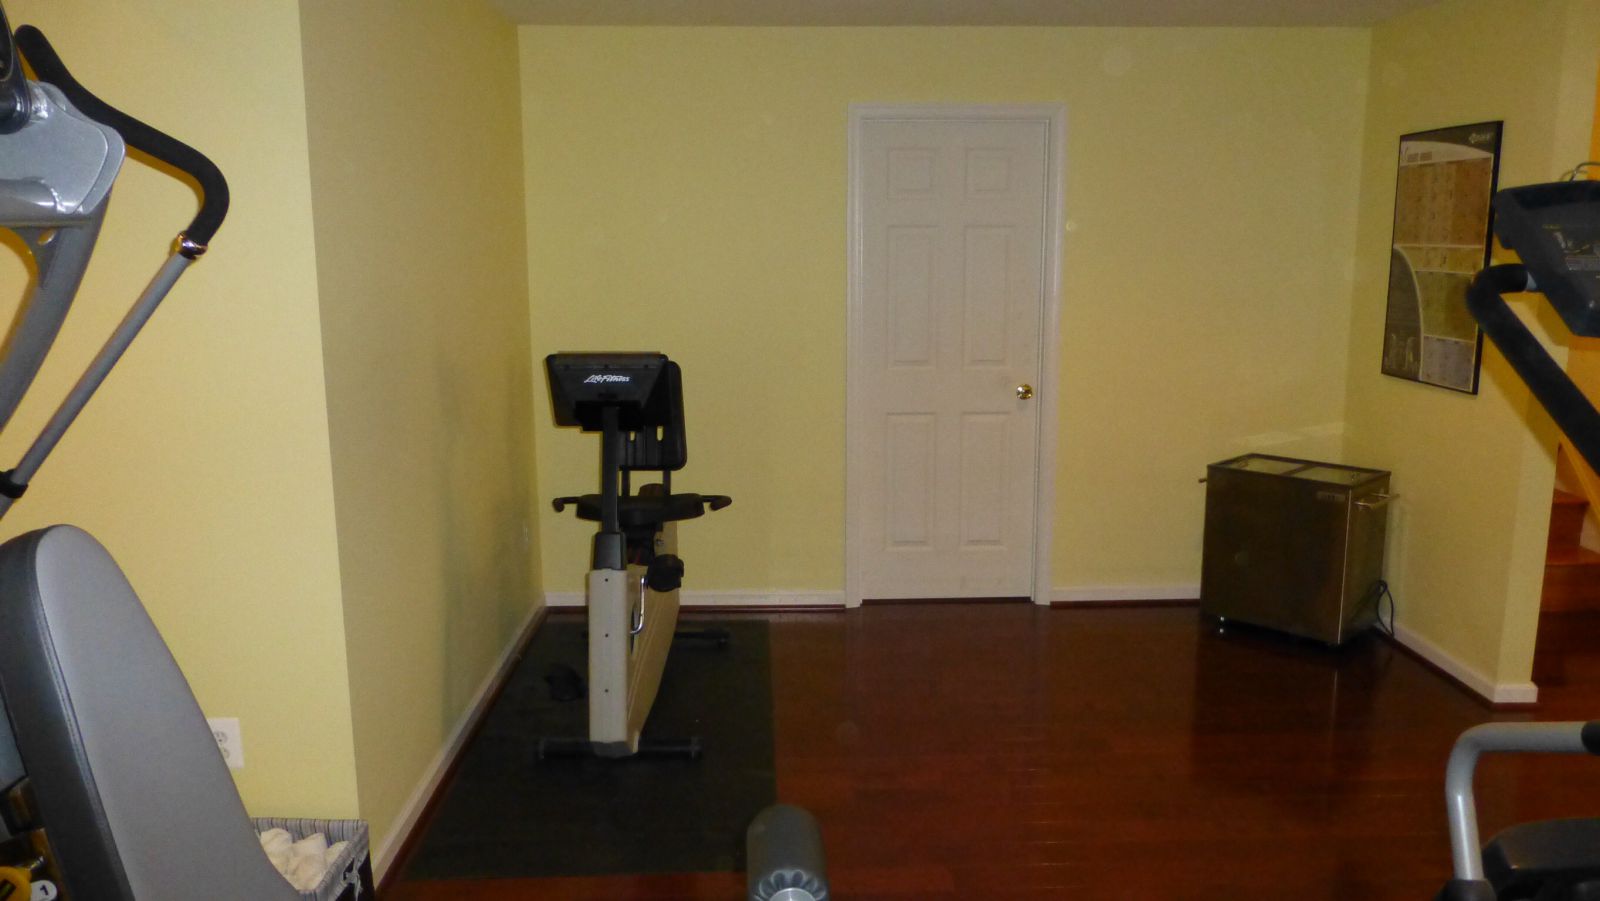 D- Current Home Gym